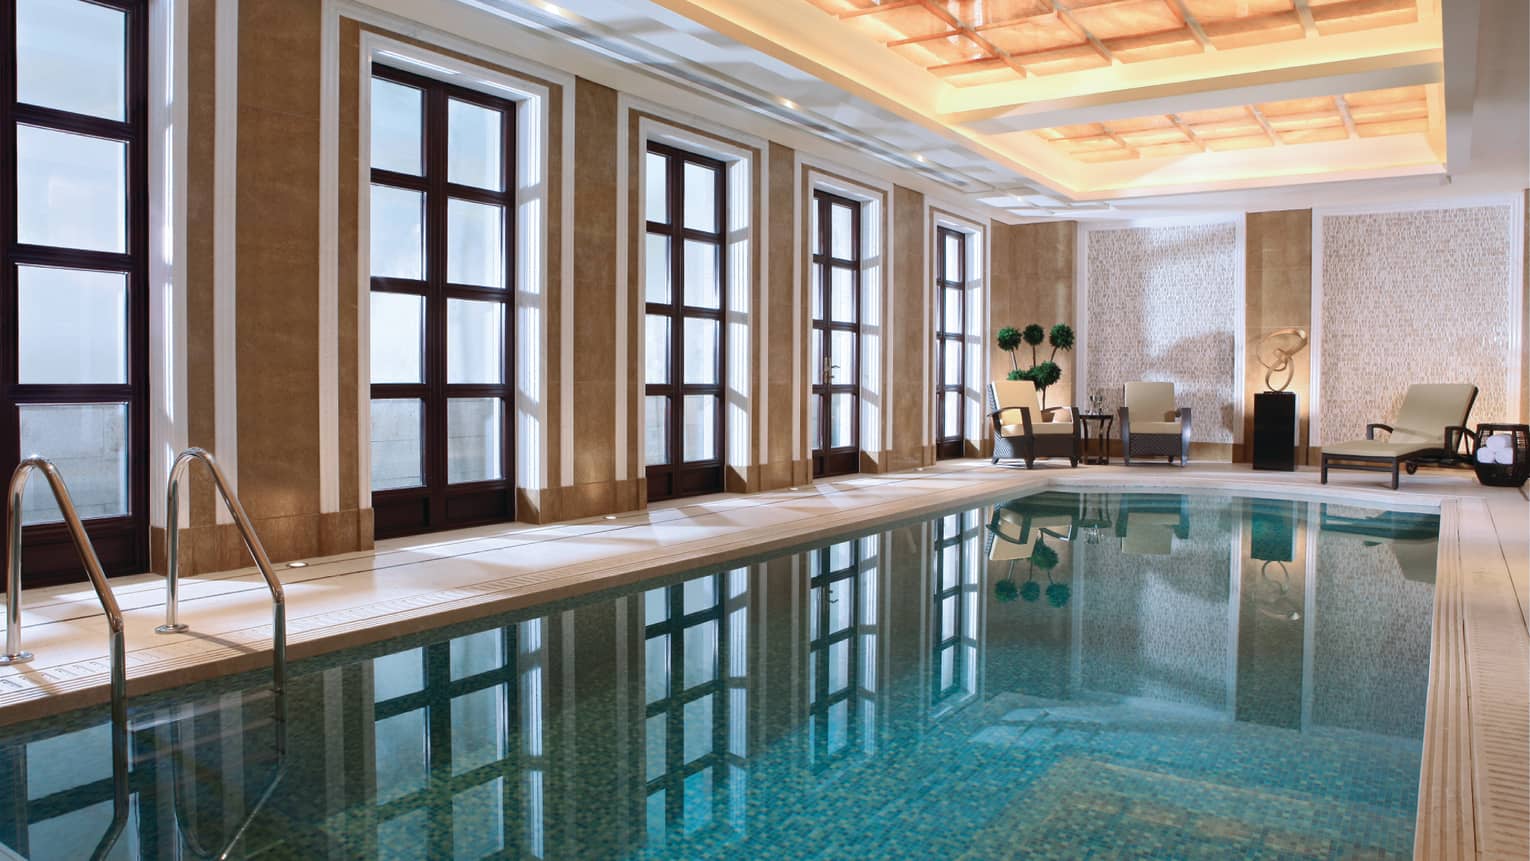 Floor-to-ceiling windows reflecting on long indoor swimming pool